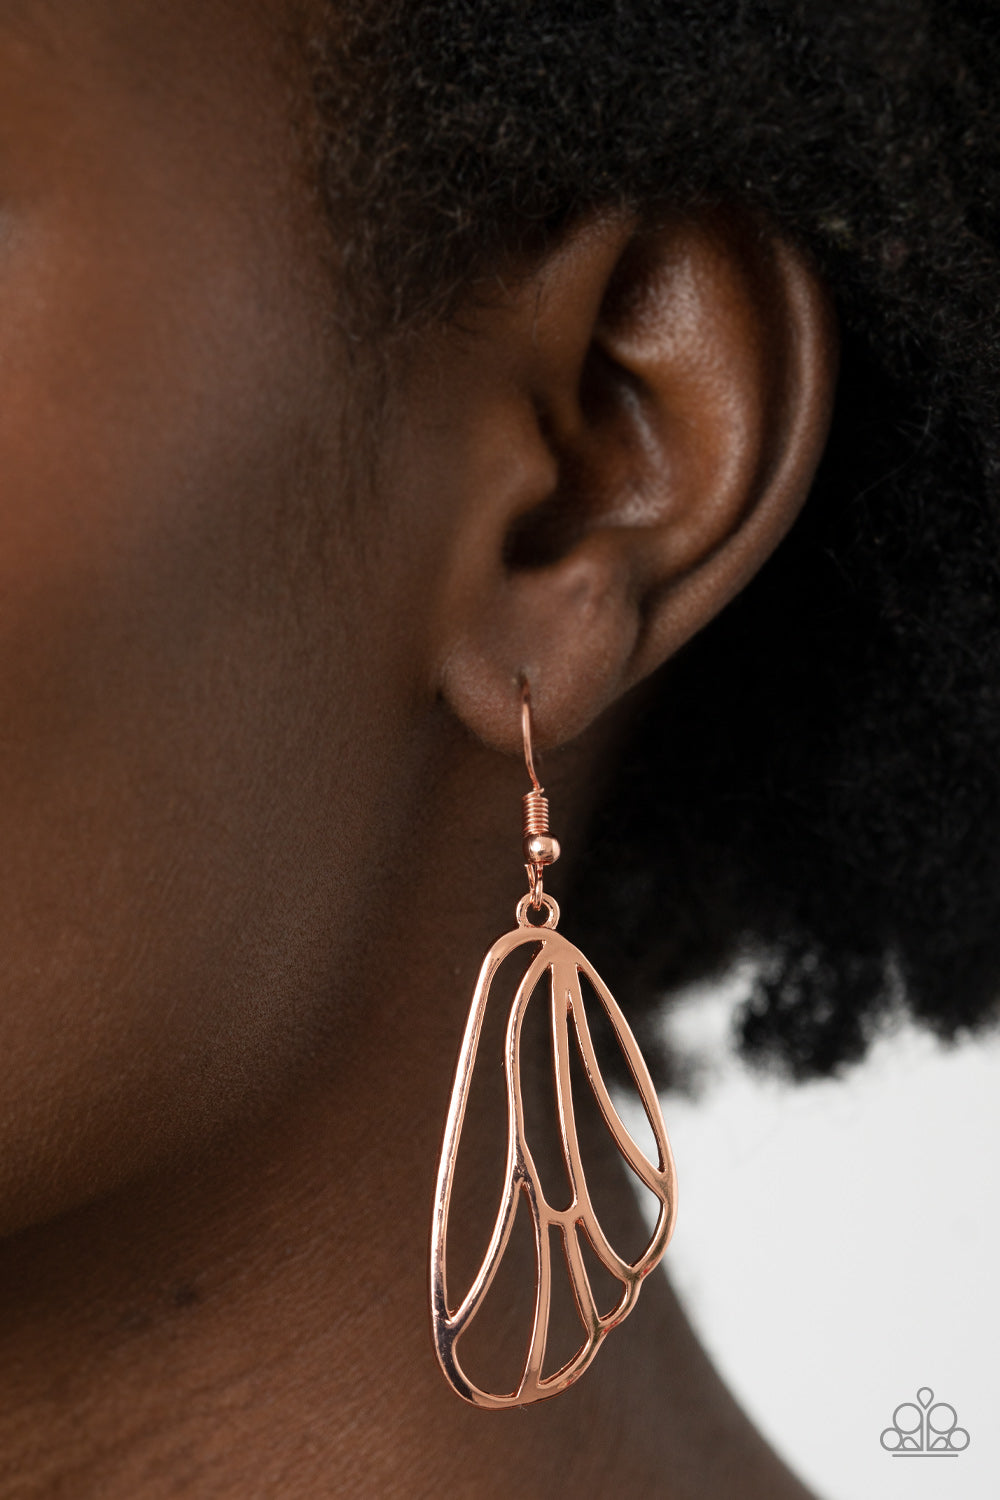 Turn Into A Butterfly - Copper Earring - Princess Glam Shop